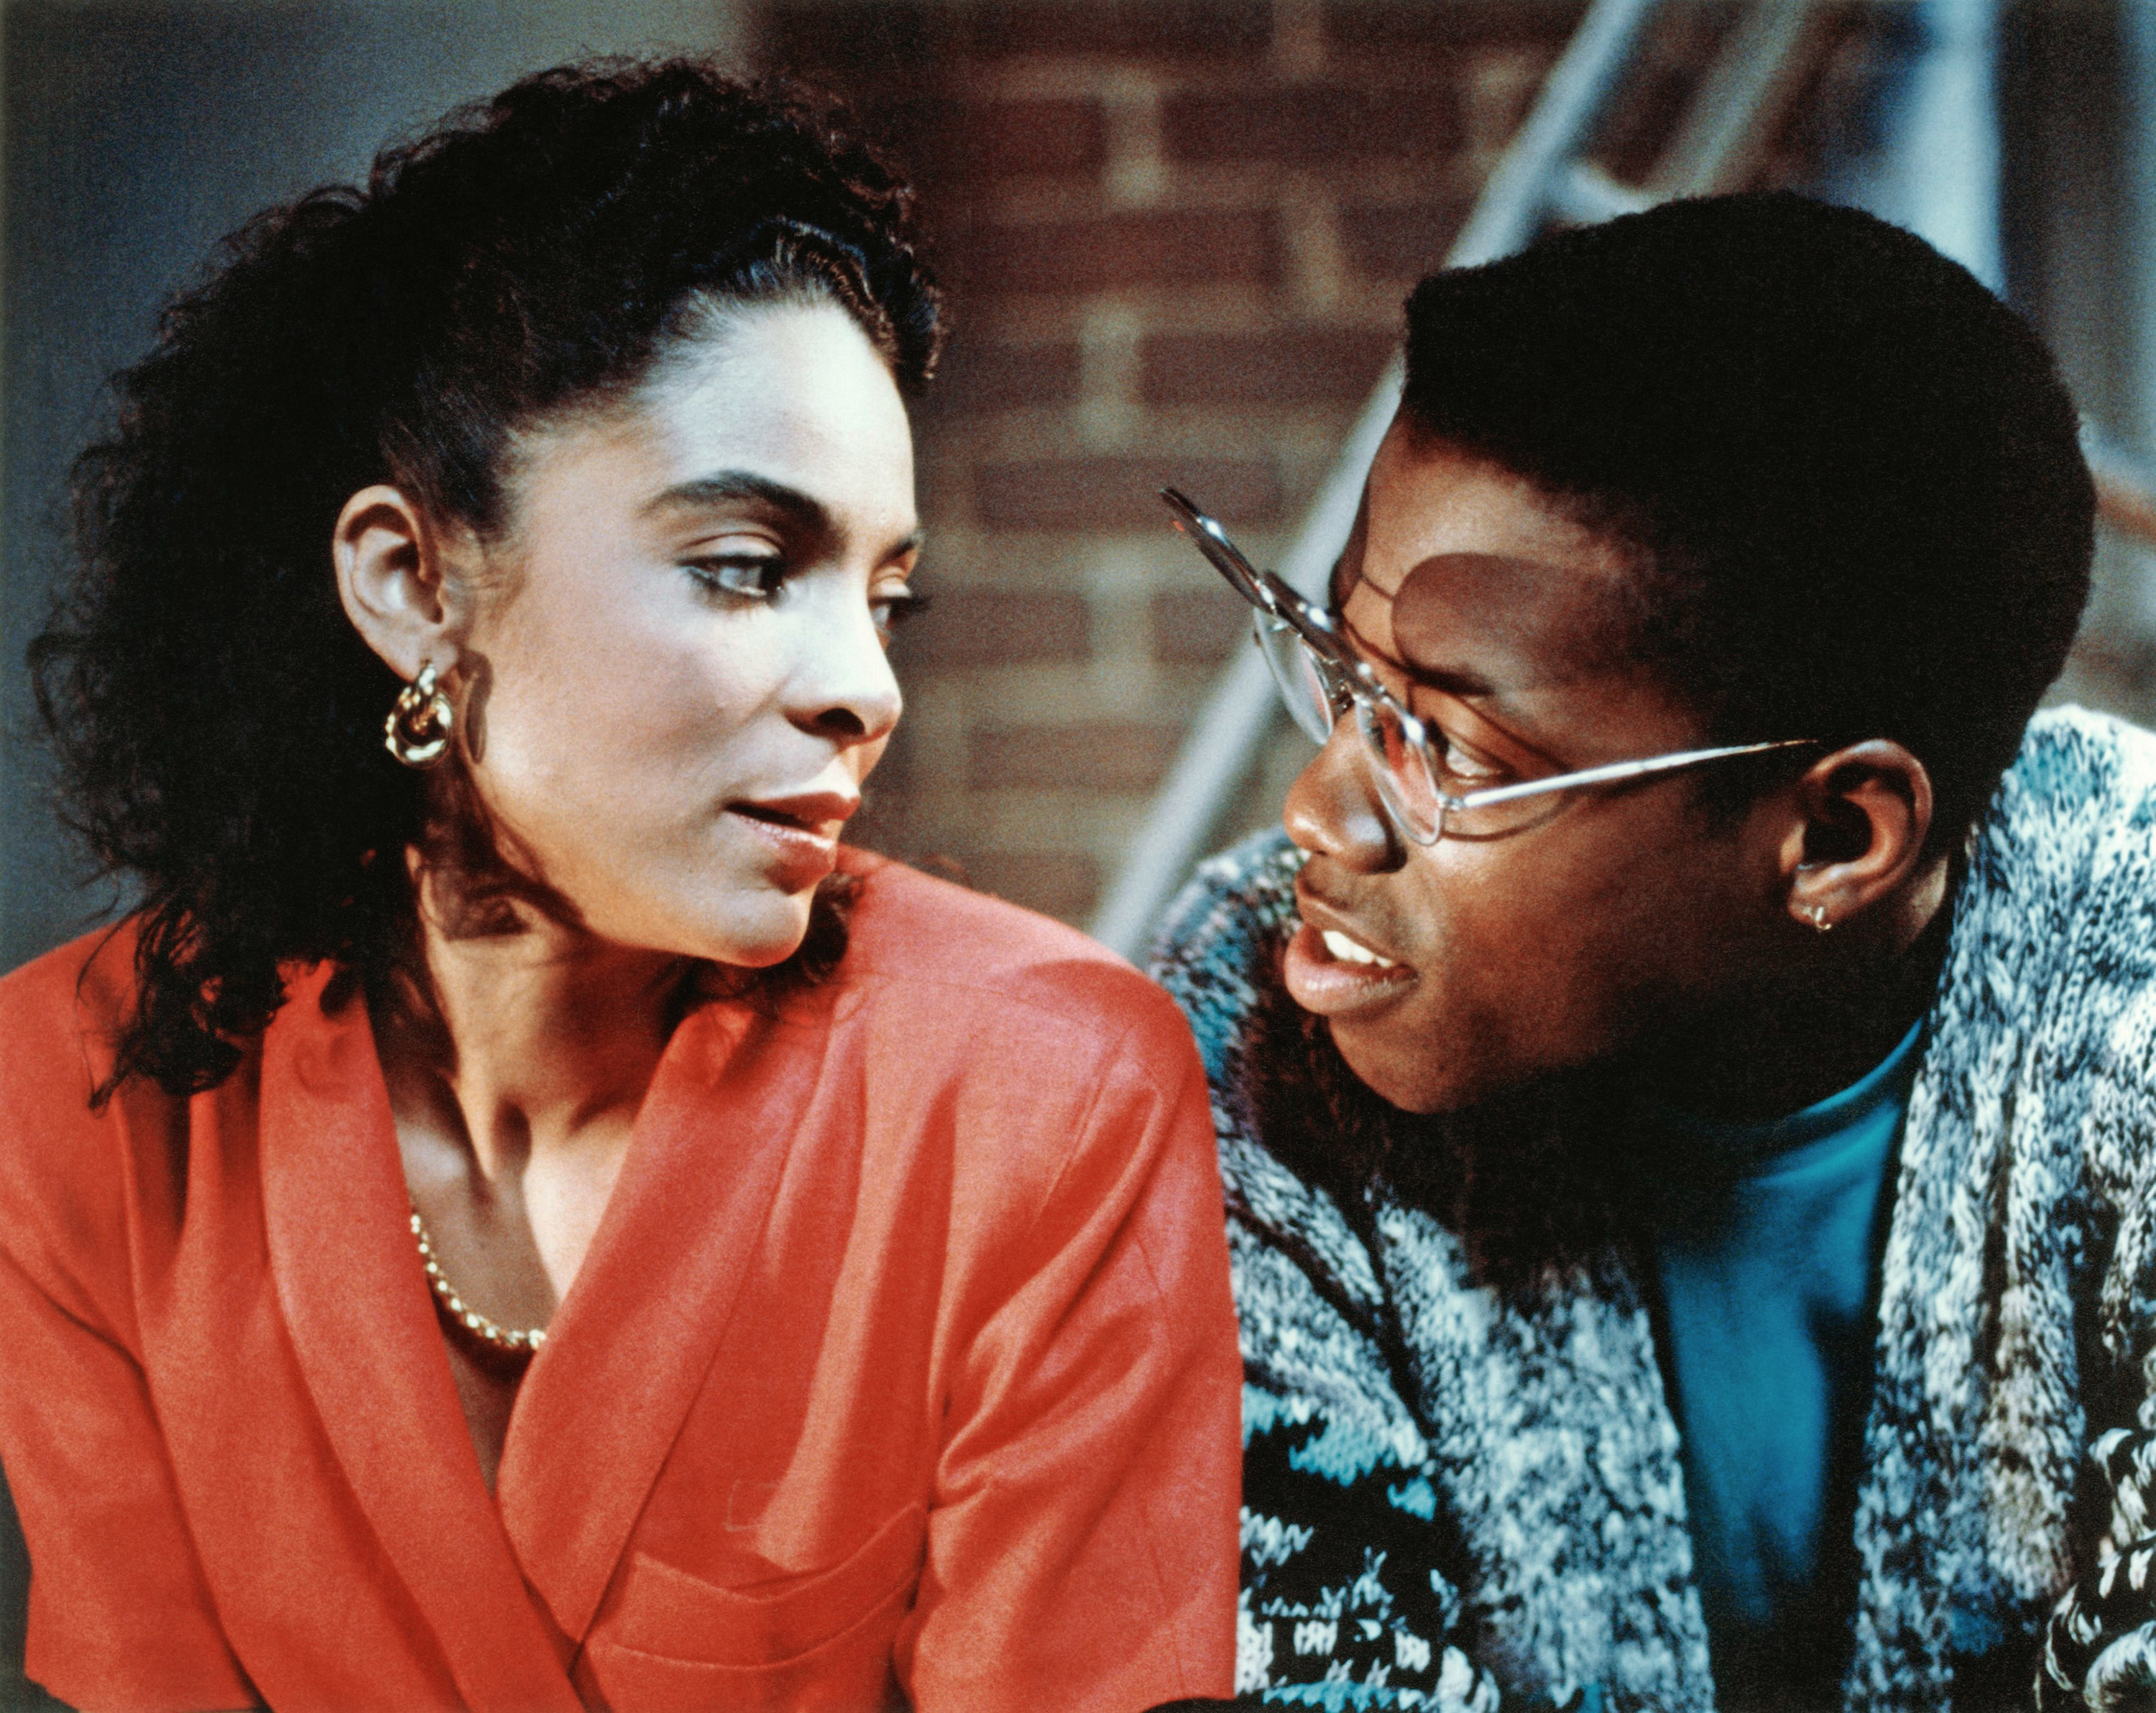 Two characters from &quot;Coming to America&quot; are engaged in conversation